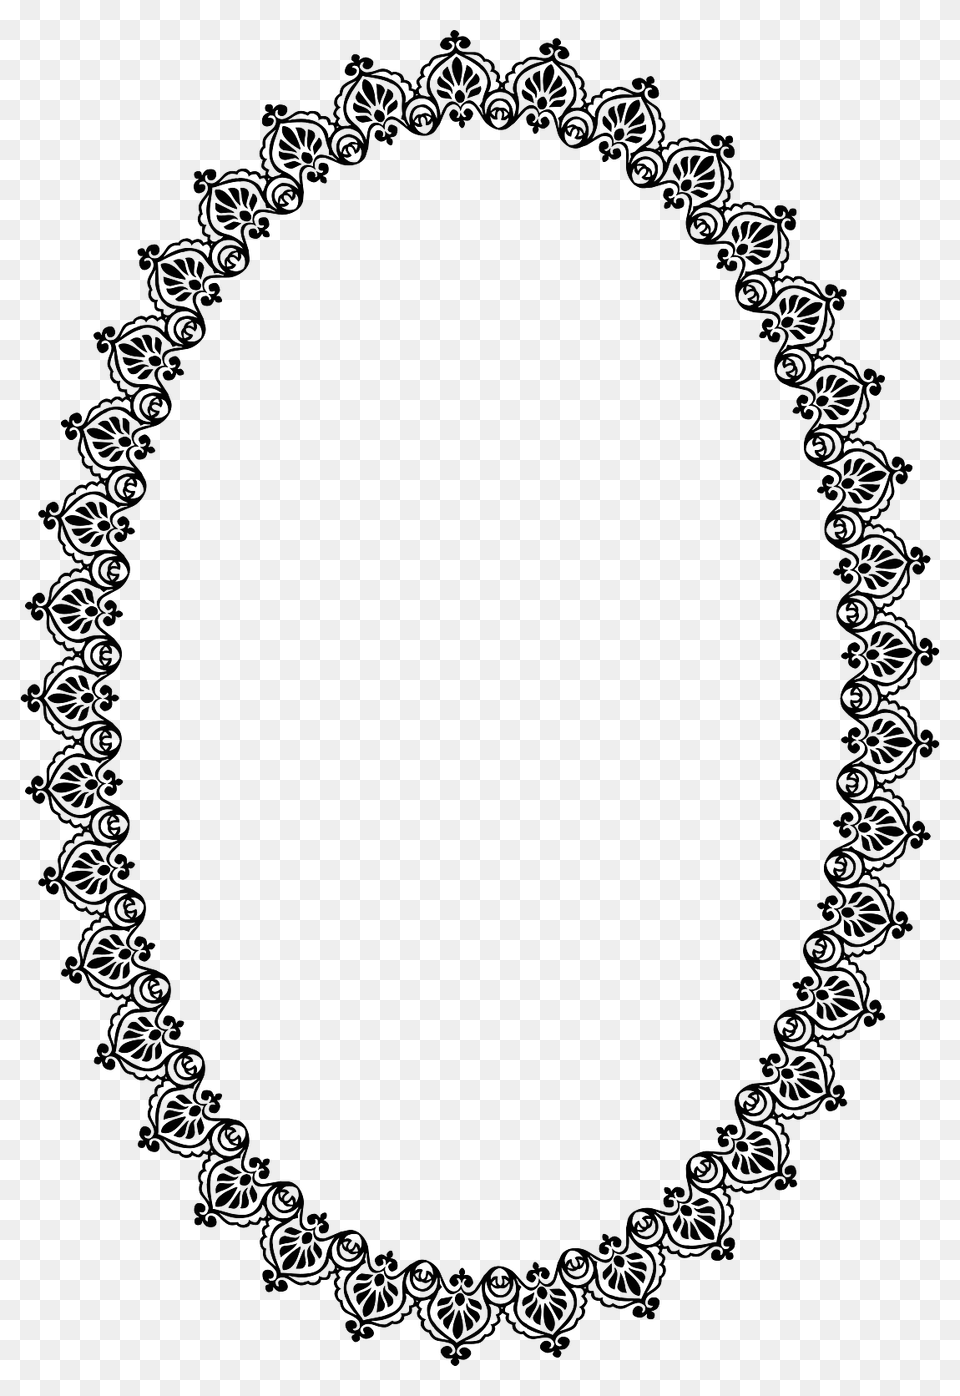 Oval Photo Frame Png Image